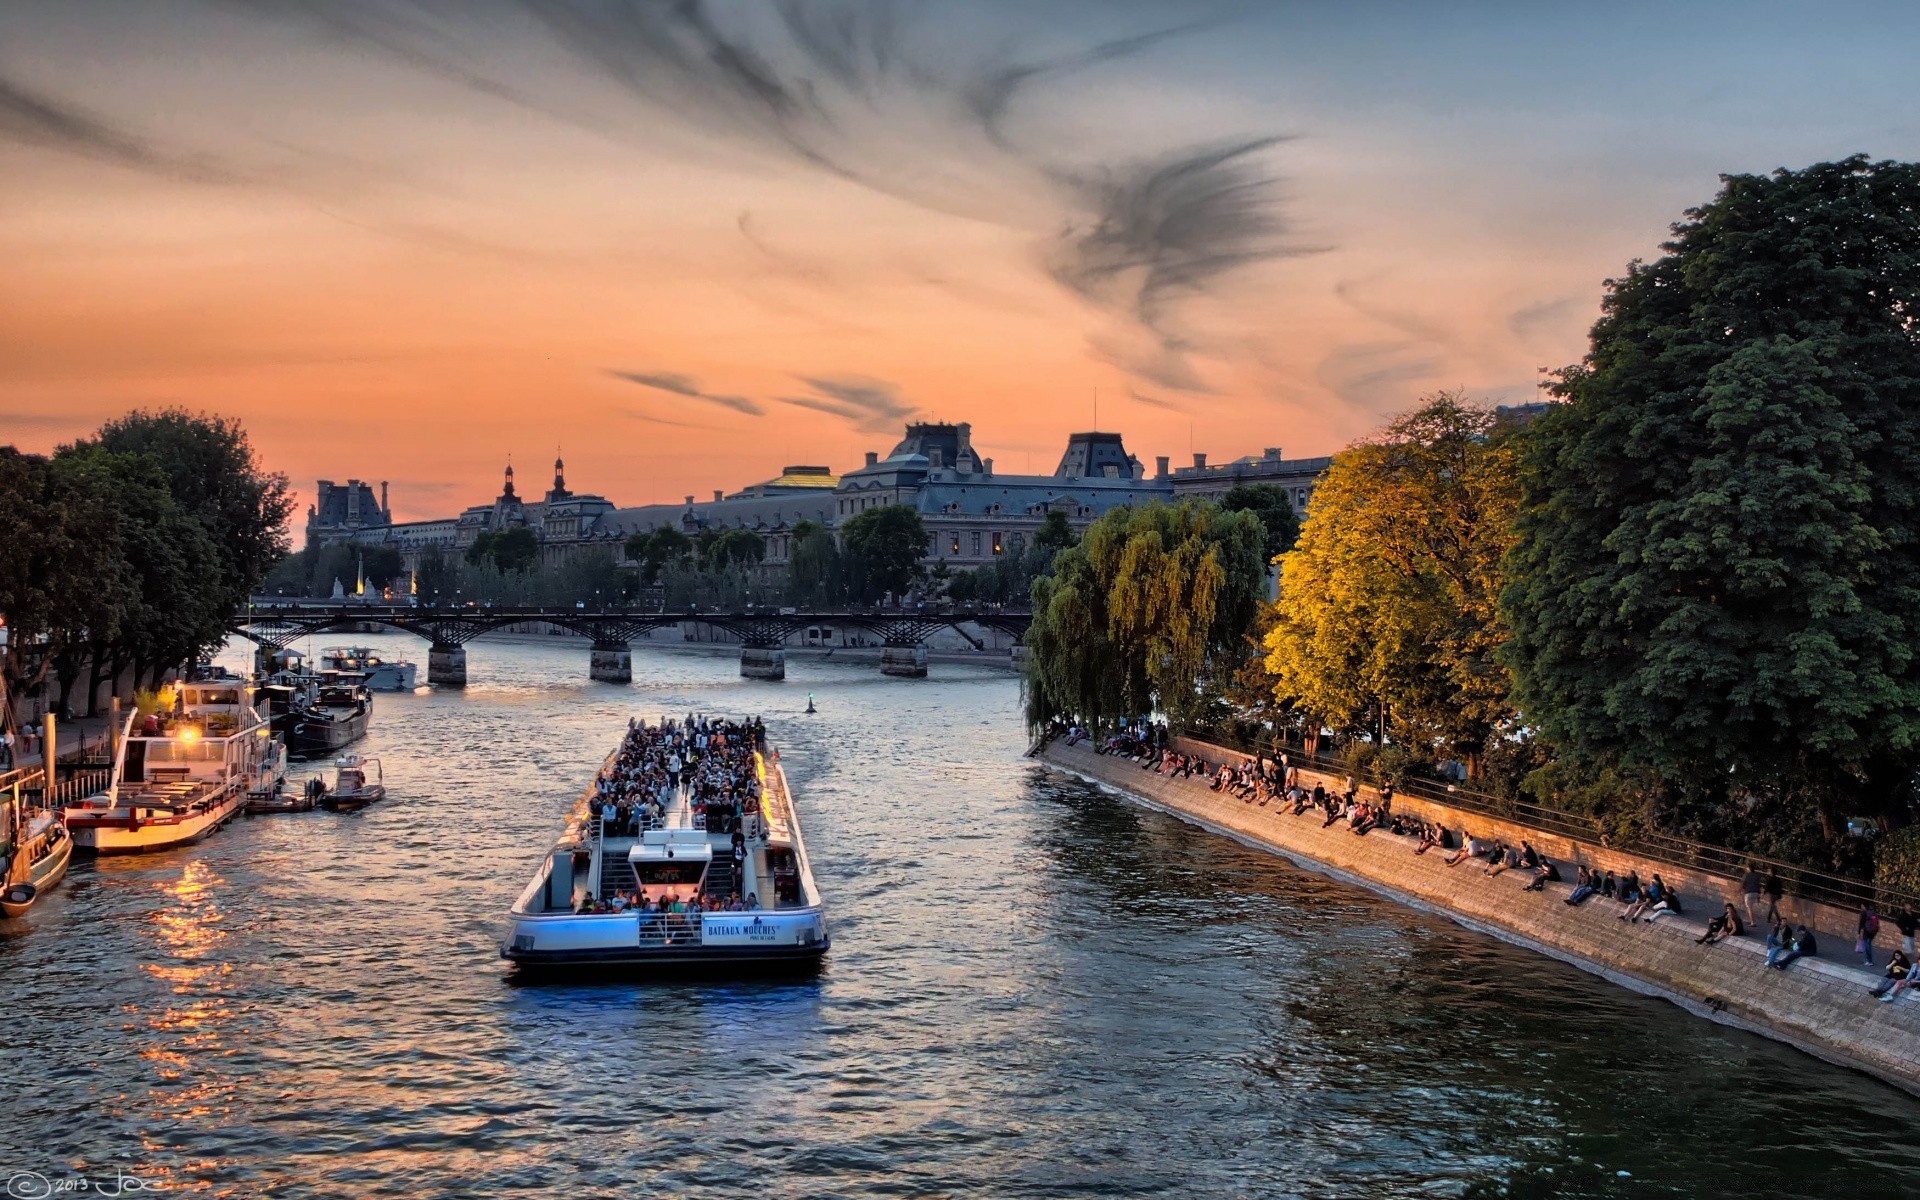 europe water river travel watercraft boat outdoors sky lake sunset transportation system reflection evening vehicle tree architecture dawn tourism canal